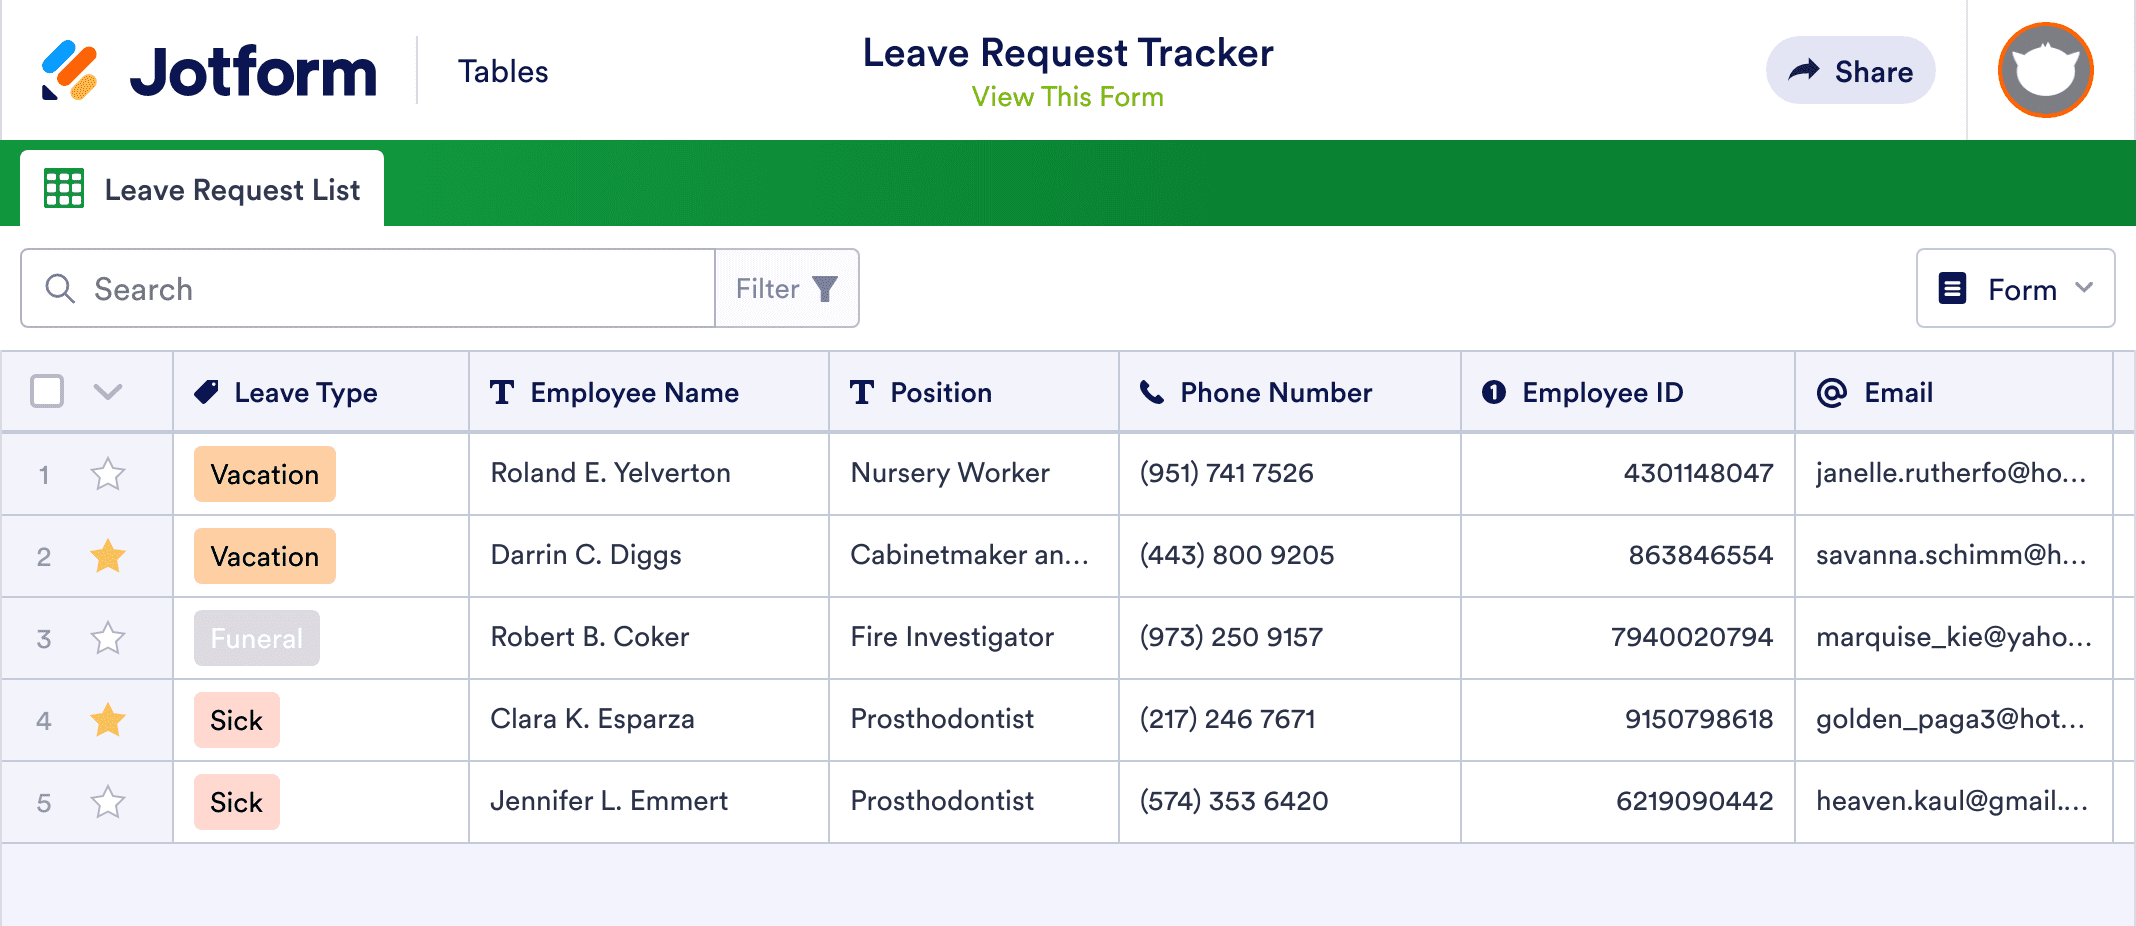 Leave Request Tracker 